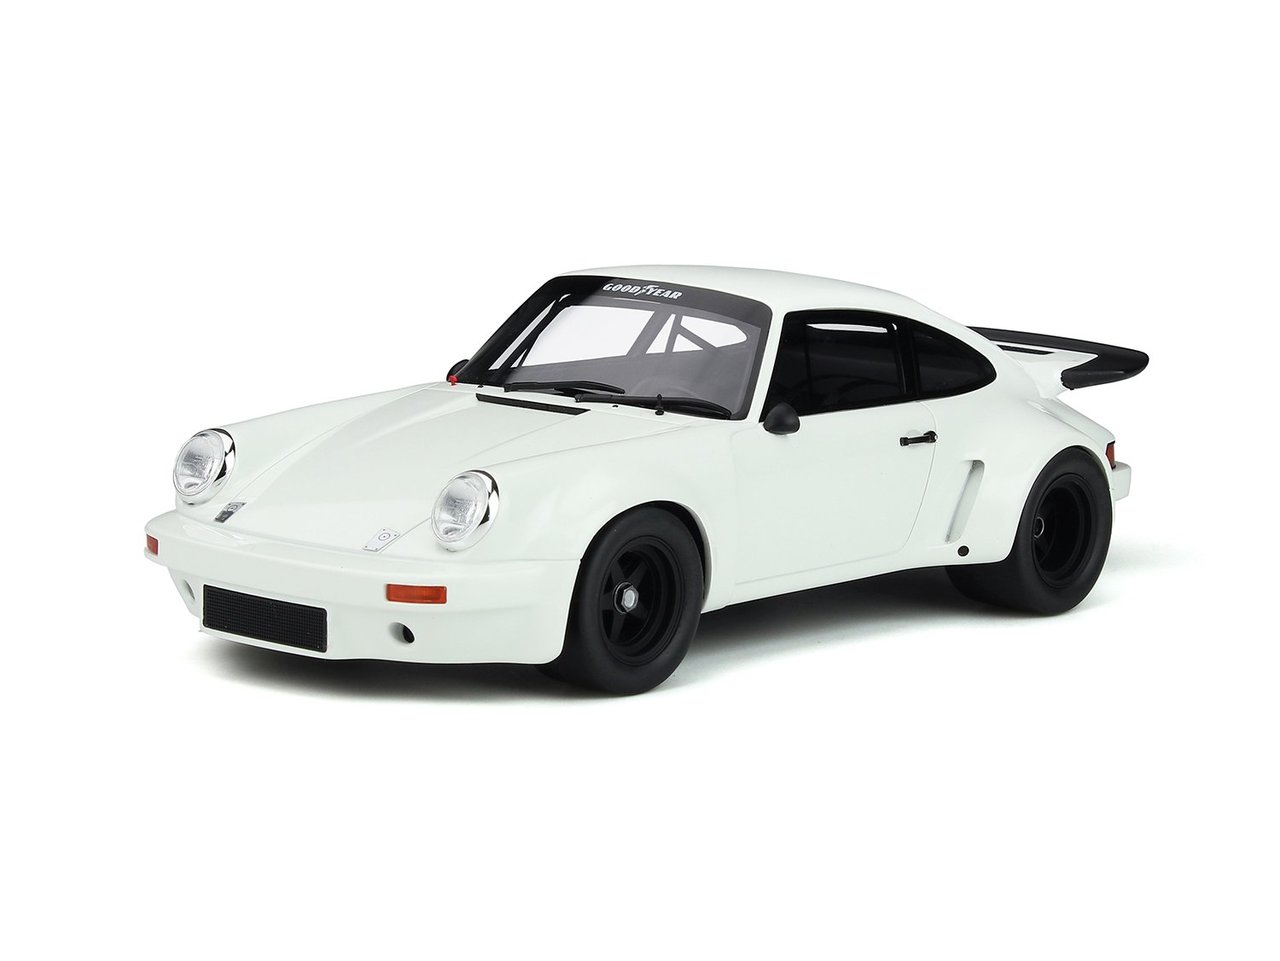 Porsche 911 3.0 Rsr Grand Prix White With Black Wheels Limited Edition To 999 Pieces Worldwide 1/18 Model Car By Gt Spirit